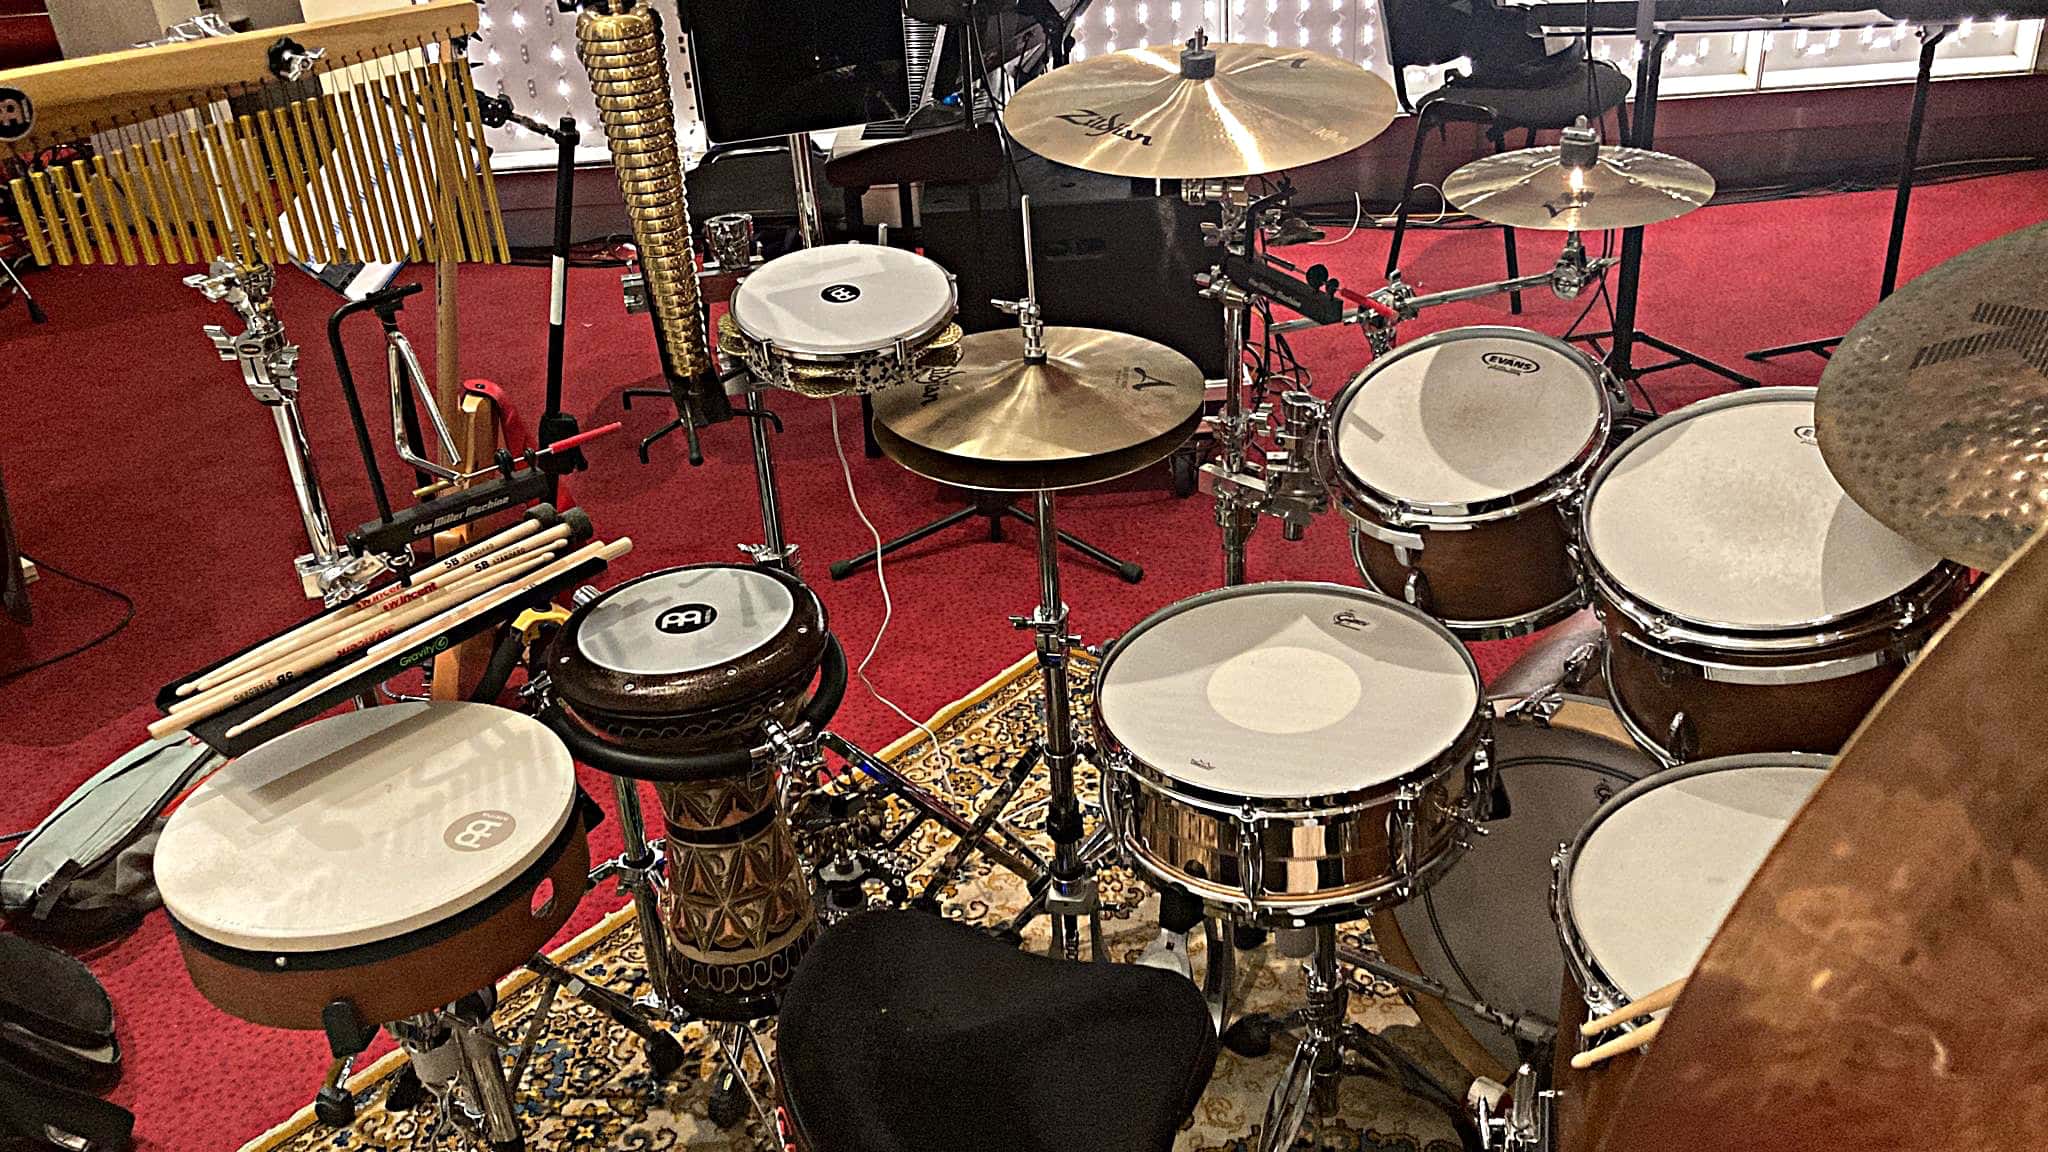 Ángel Crespo's drum set setup for the International Production of Broadway's Aladdin at the Teatro Coliseum in Madrid, Spain